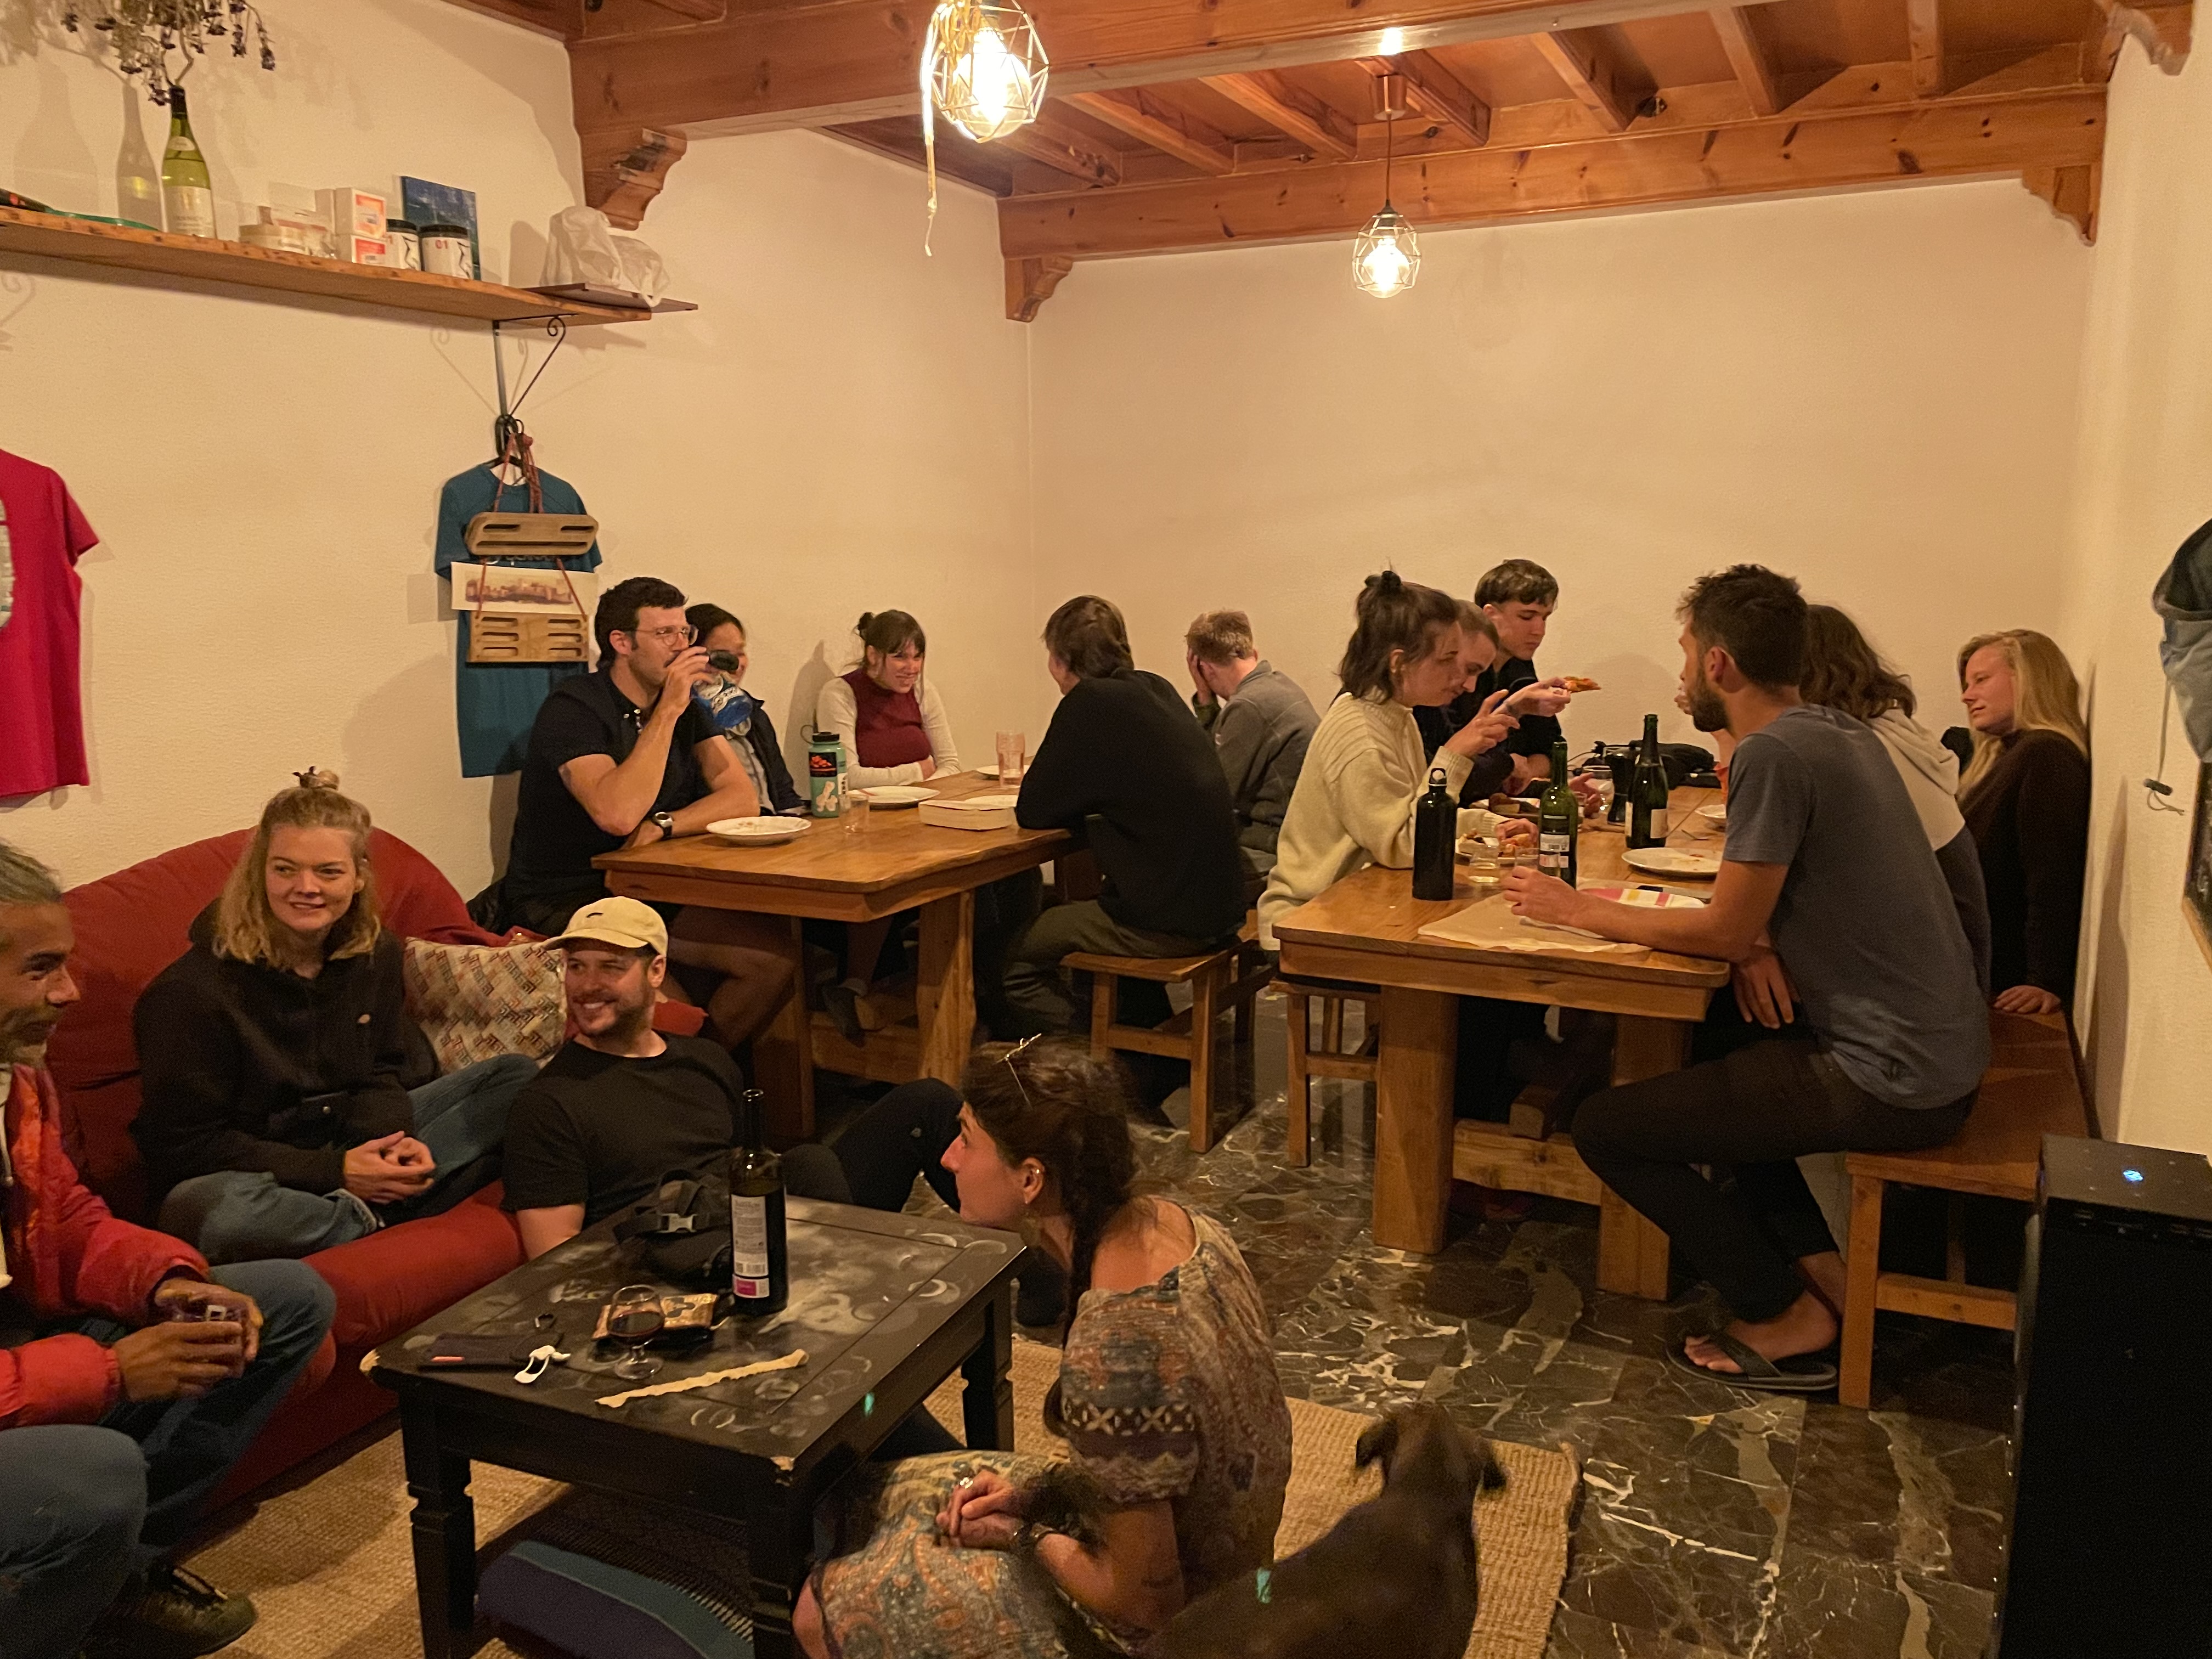 travellers sharing dinner in the Solana de Granada lounge